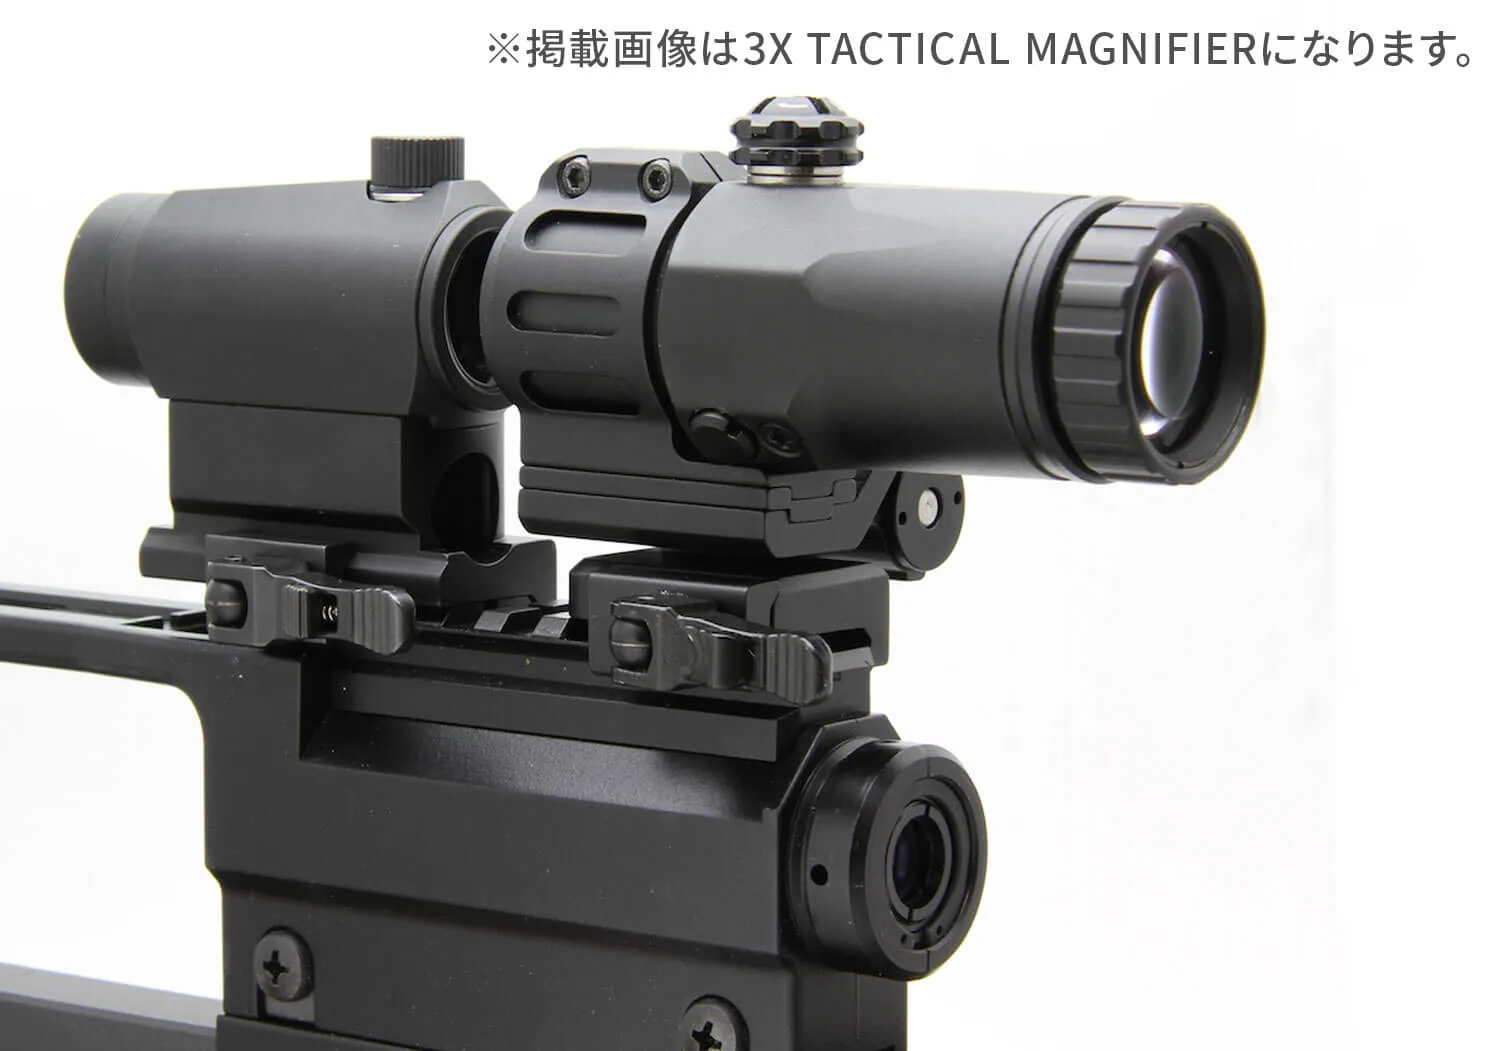 5X TACTICAL MAGNIFIER | MAGNIFIER | ノーベルアームズ 